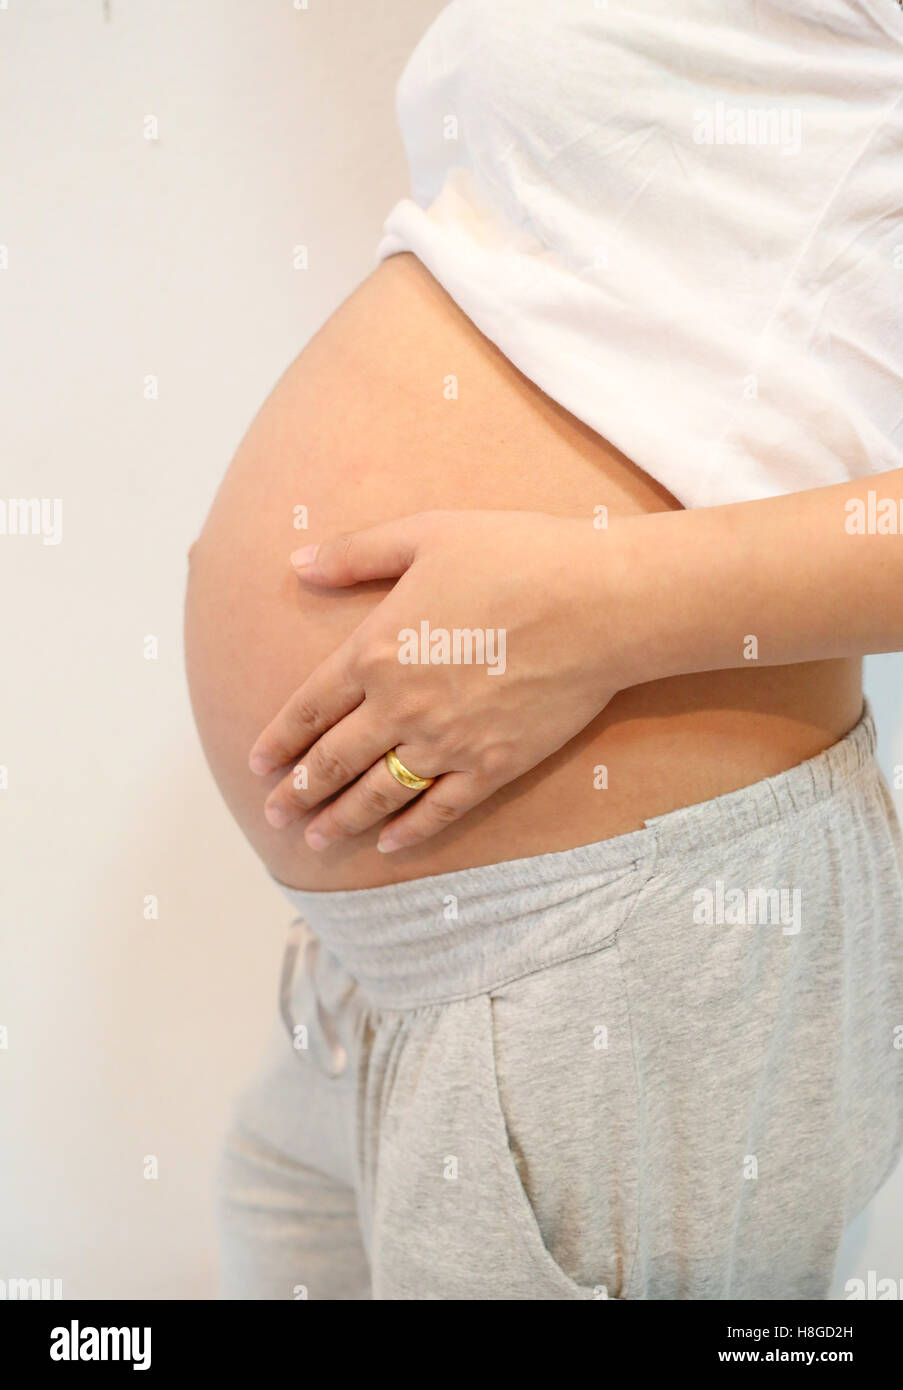 Pregnant women touch hand to belly in concept love for baby. Stock Photo